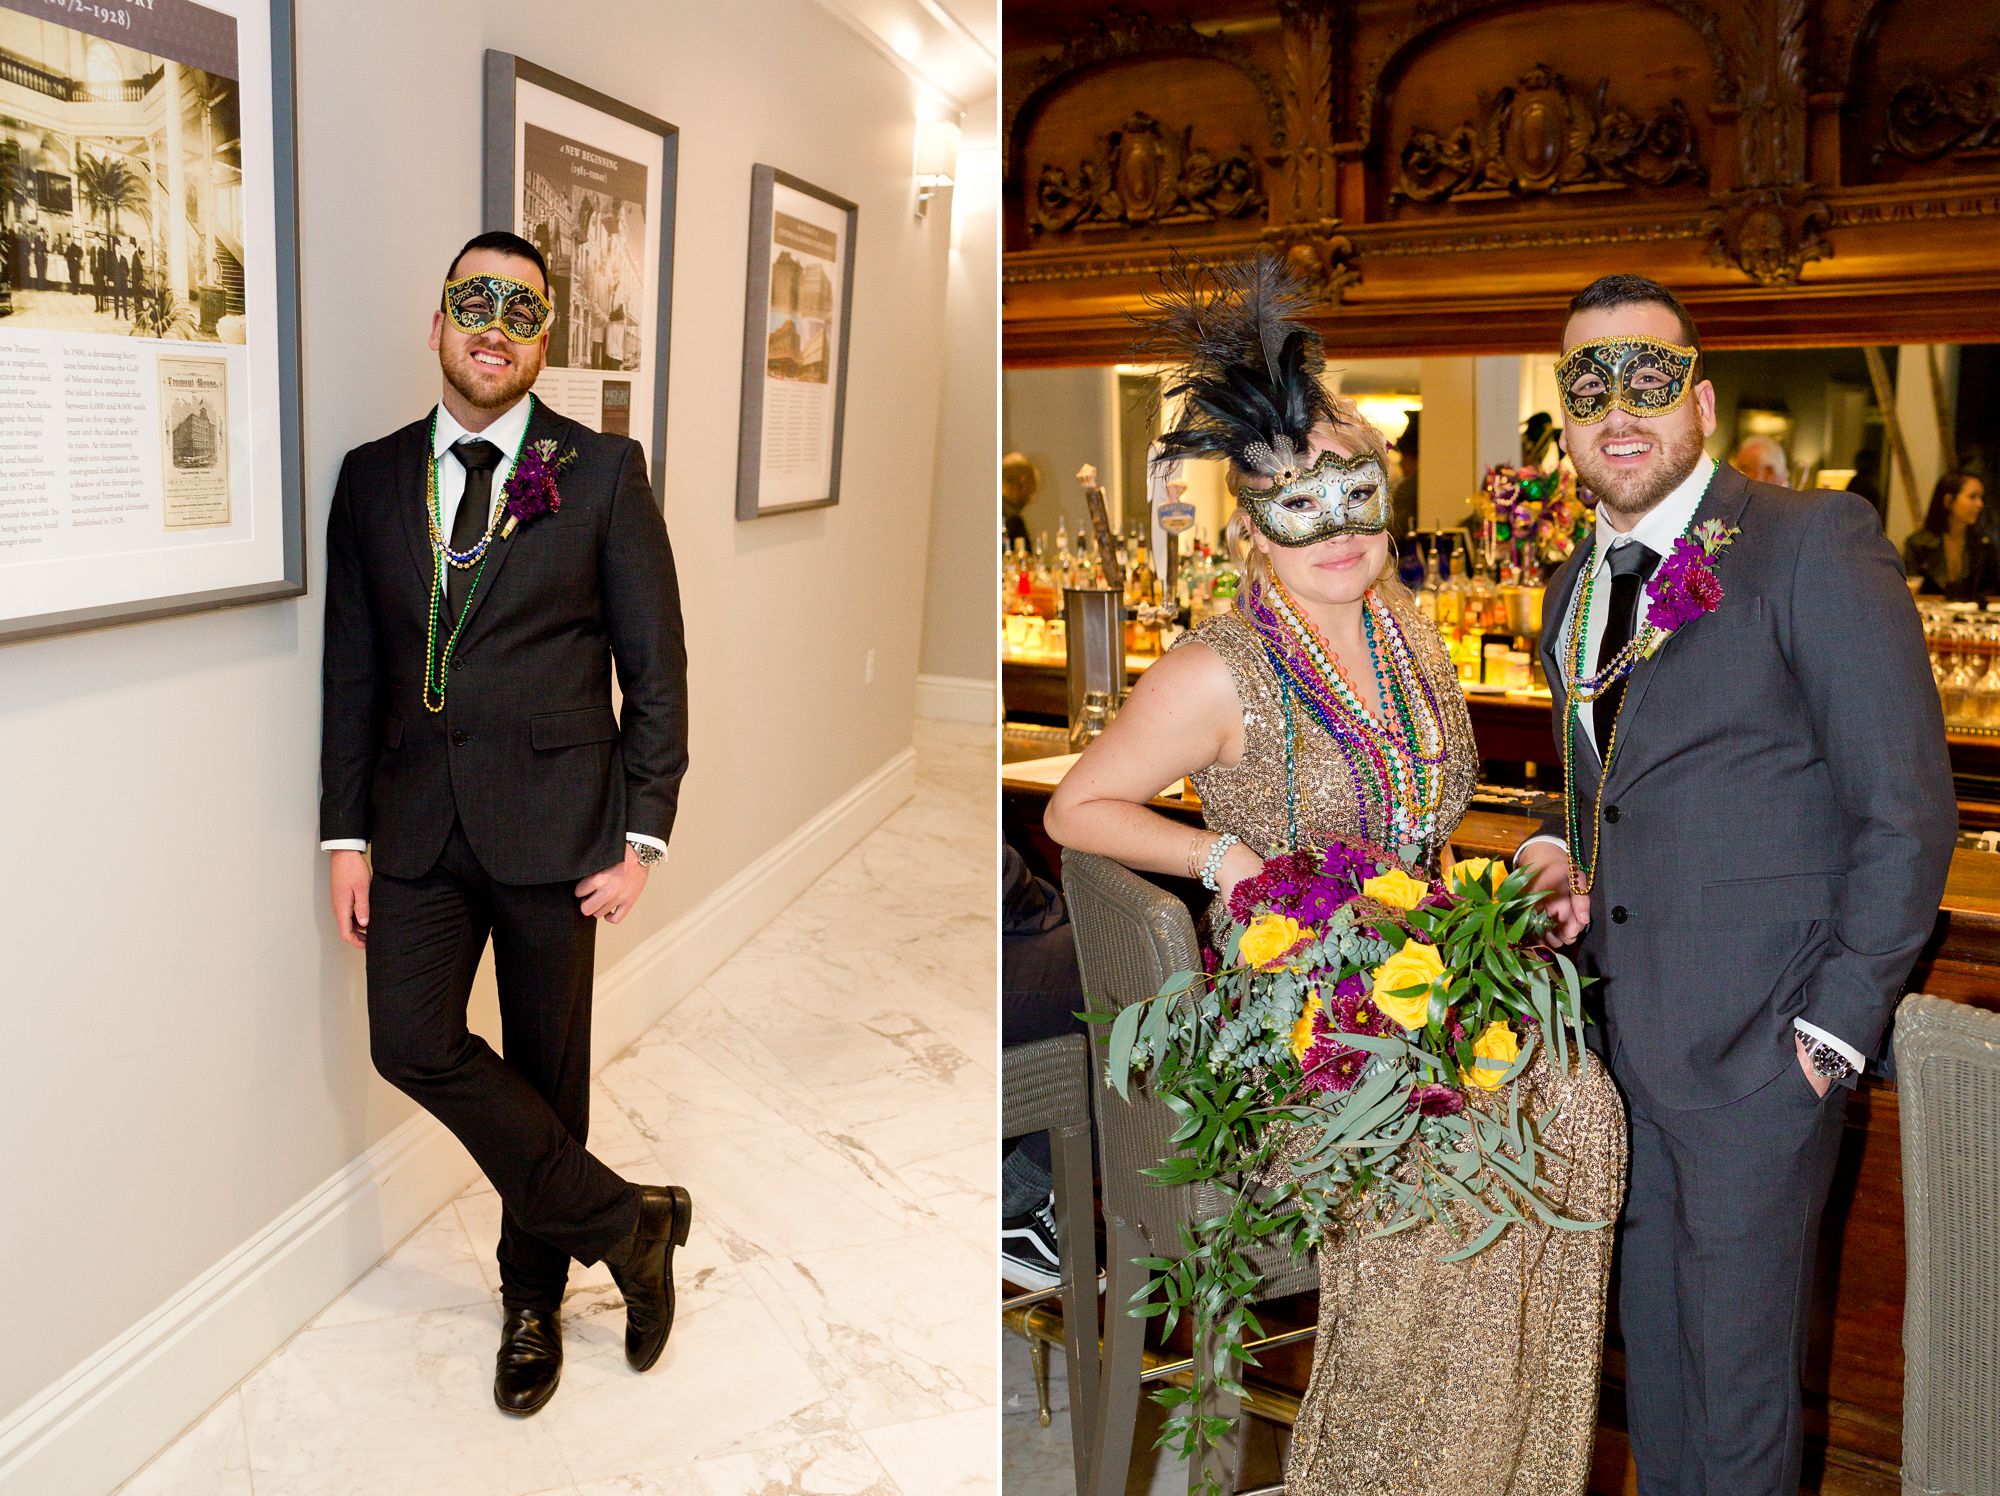 A bride and groom in masquerade masks at the Tremont House in Galveston.